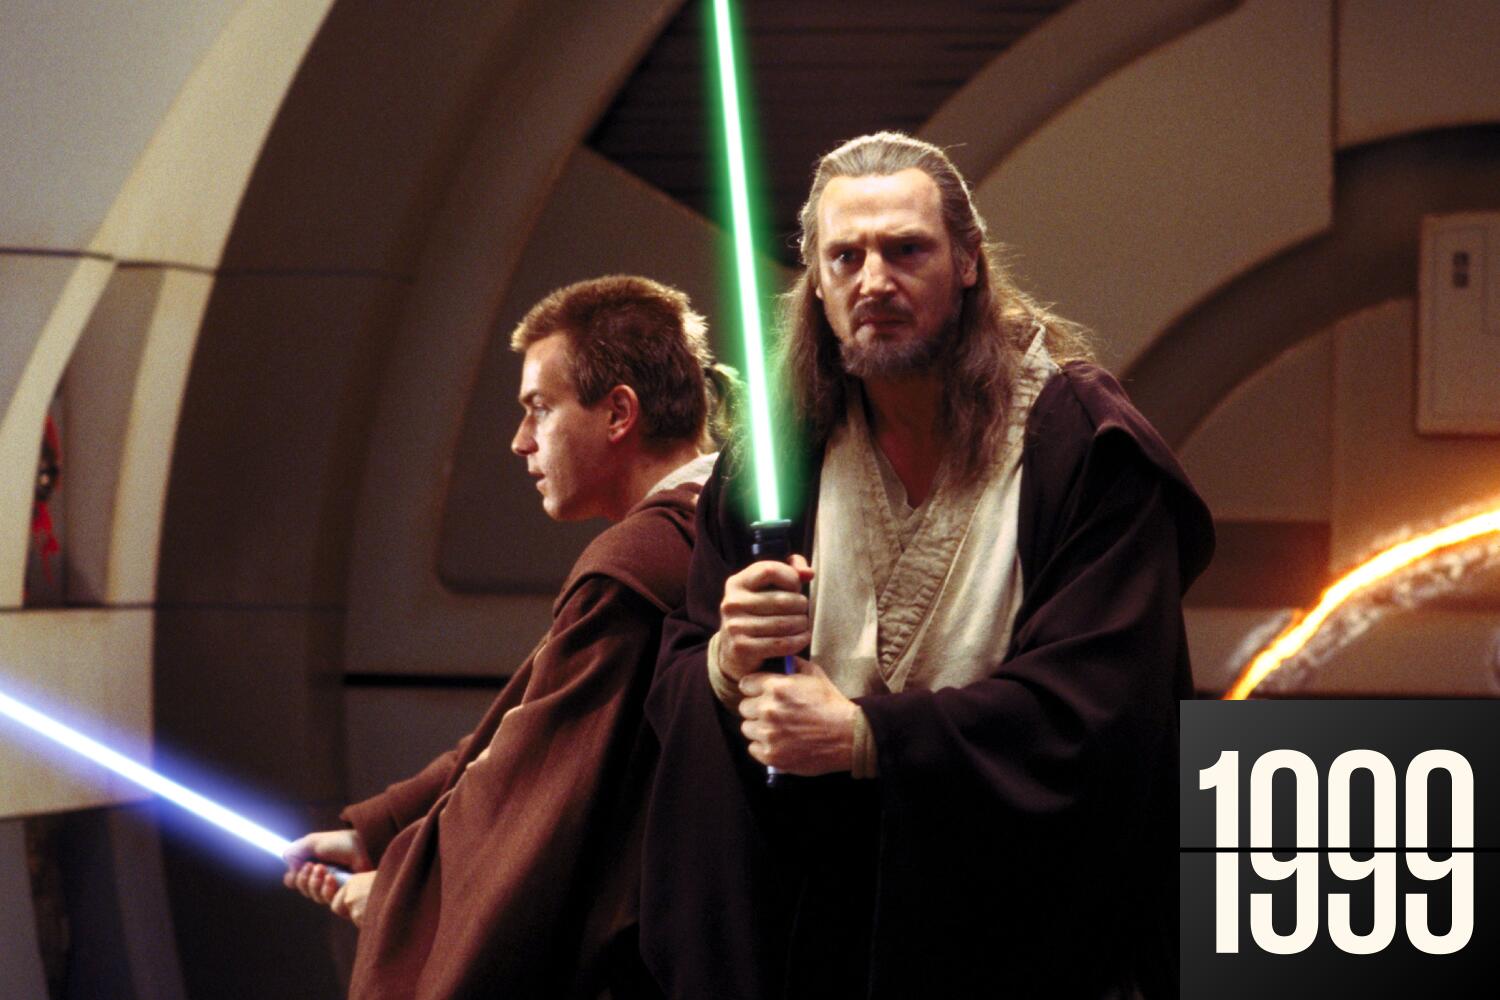 ‘the-phantom-menace’-dominated-1999’s-box-office.-history-has-been-kinder-to-it